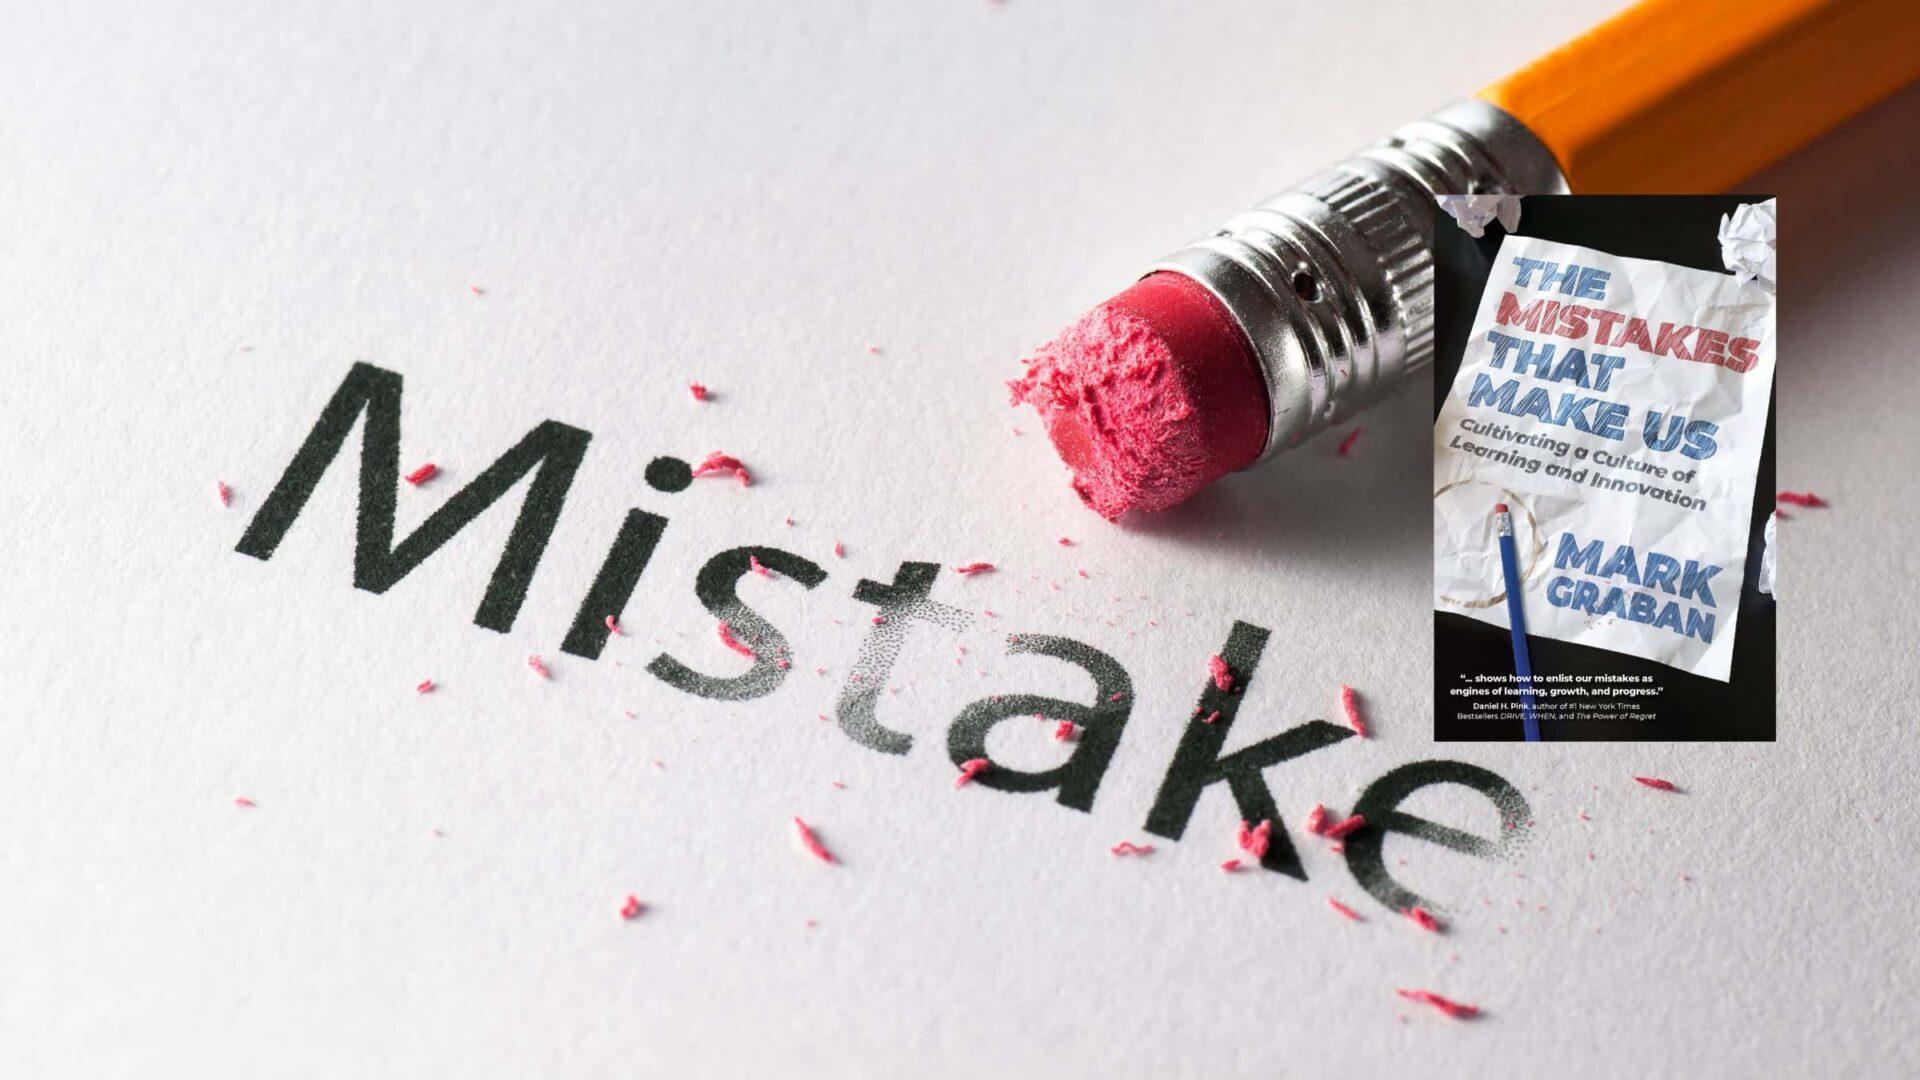 The best way to explain that you've made a mistake